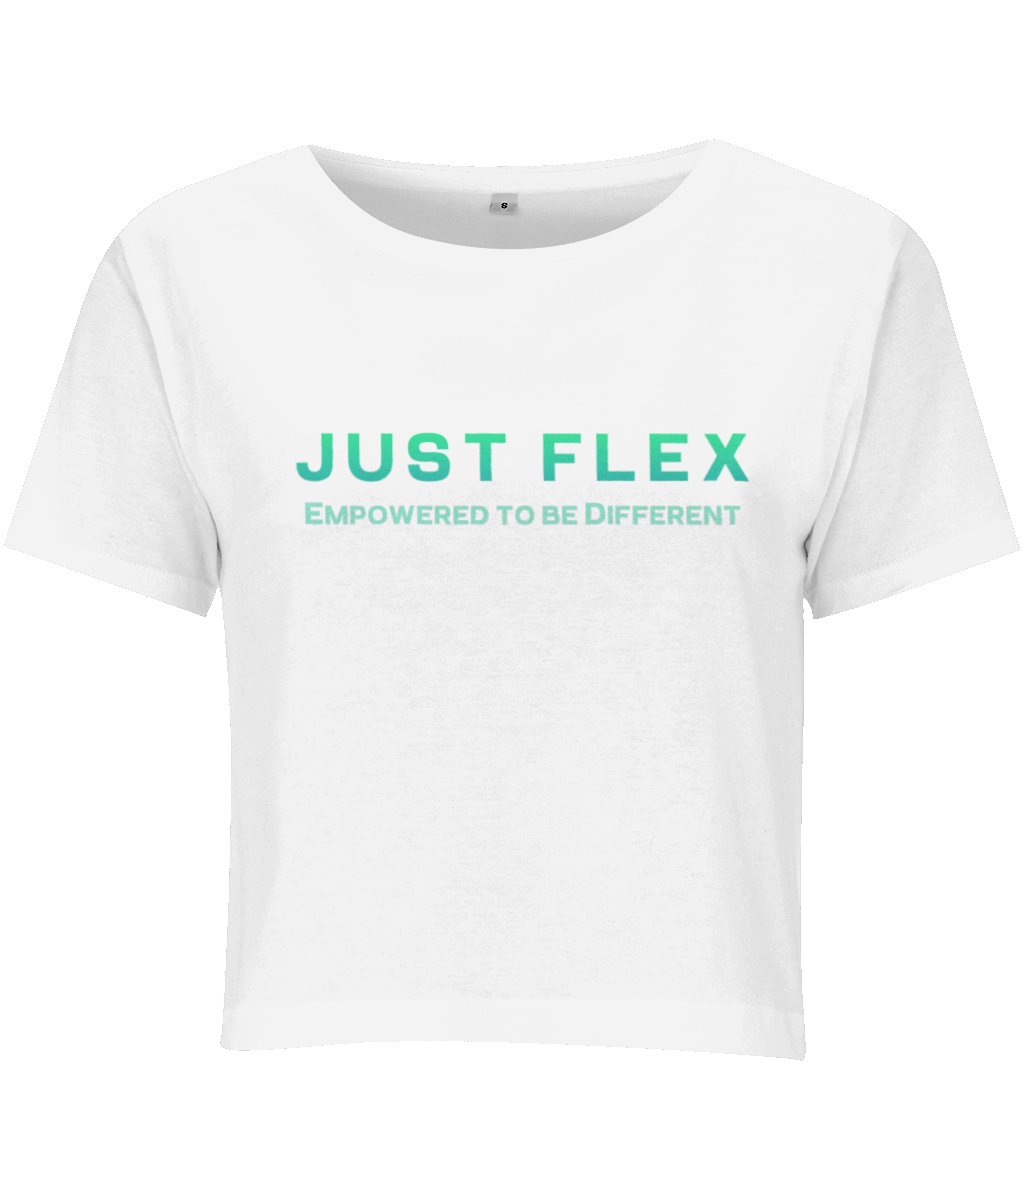 Just Flex - Empowered To Be Different Women's Cropped Tee - Just Flex